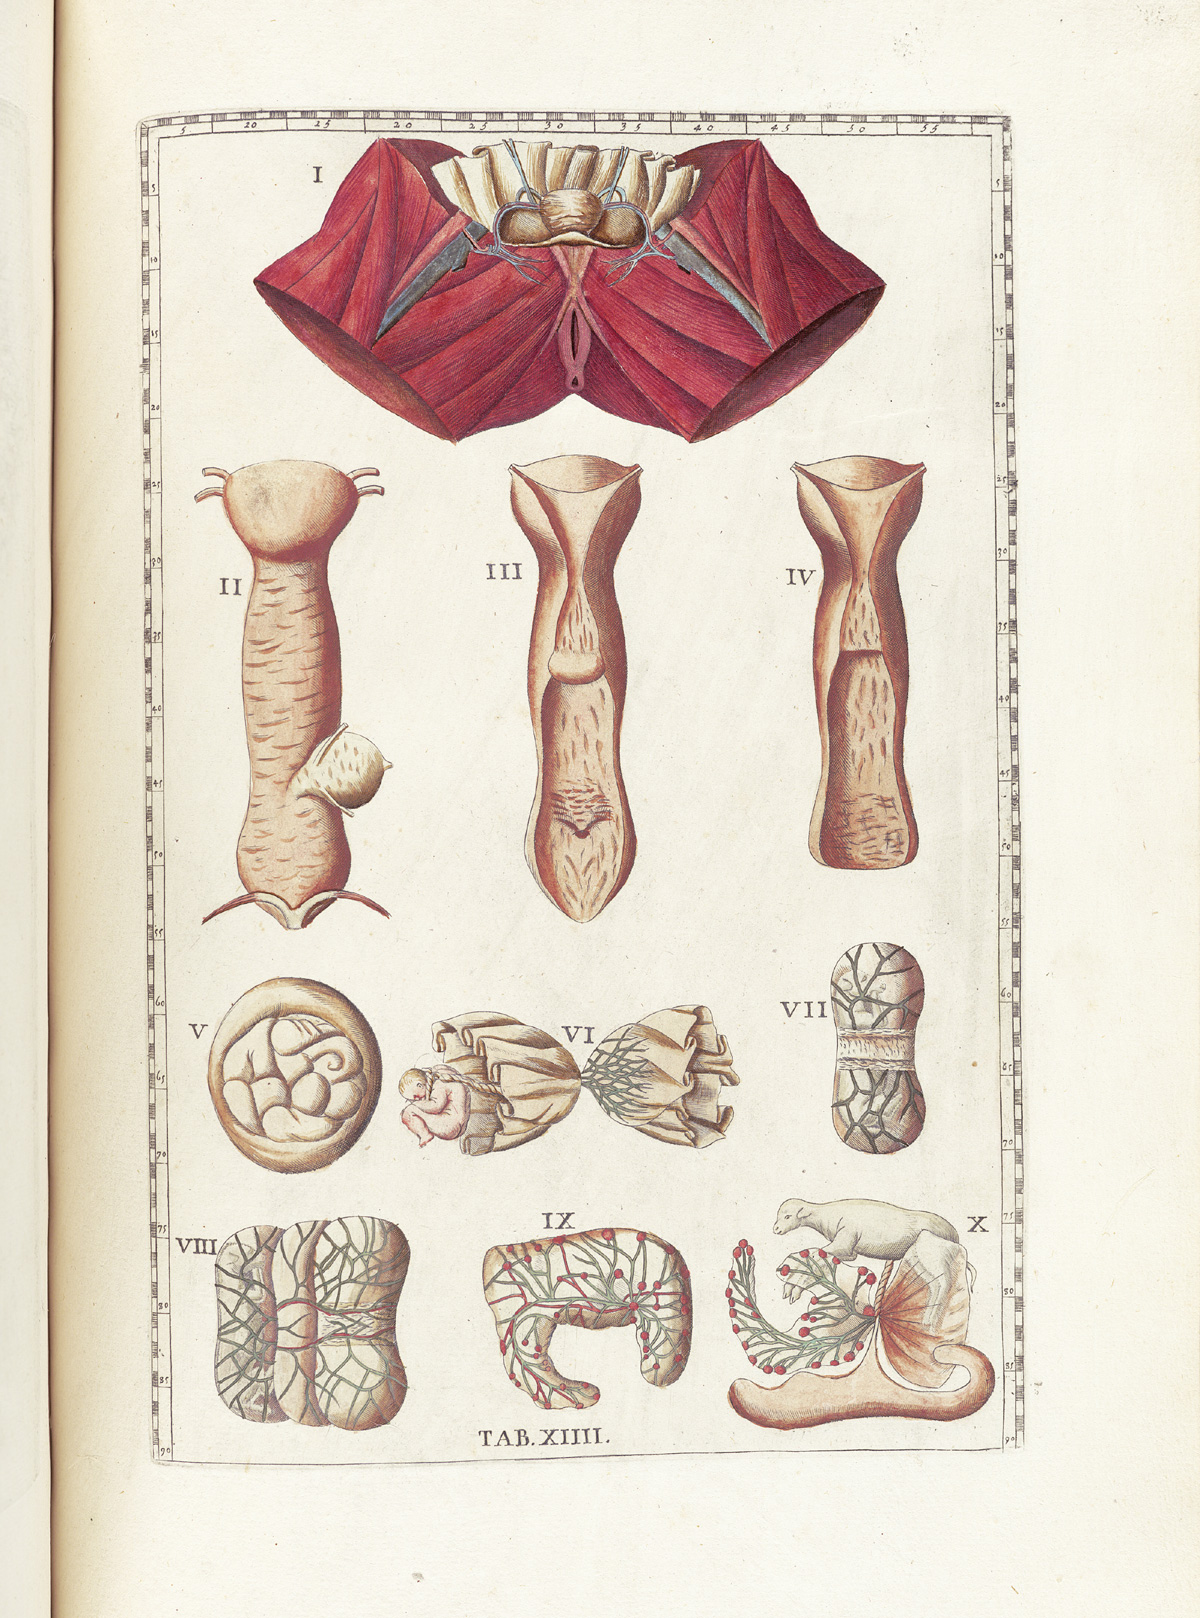 Hand-colored etching of the female reproductive system; at top is a red figure of the muscles of the pelvic region with uterus visible at top, while just below are three views of the entire system including vagina, cervix, and uterus; below this are two human placentas and one of a dog; and in the bottom row are the placentas of a dog, and two of calves; from Bartholomeo Eustachi’s Tabulae anatomicae, NLM Call no.: WZ 260 E87t 1783.